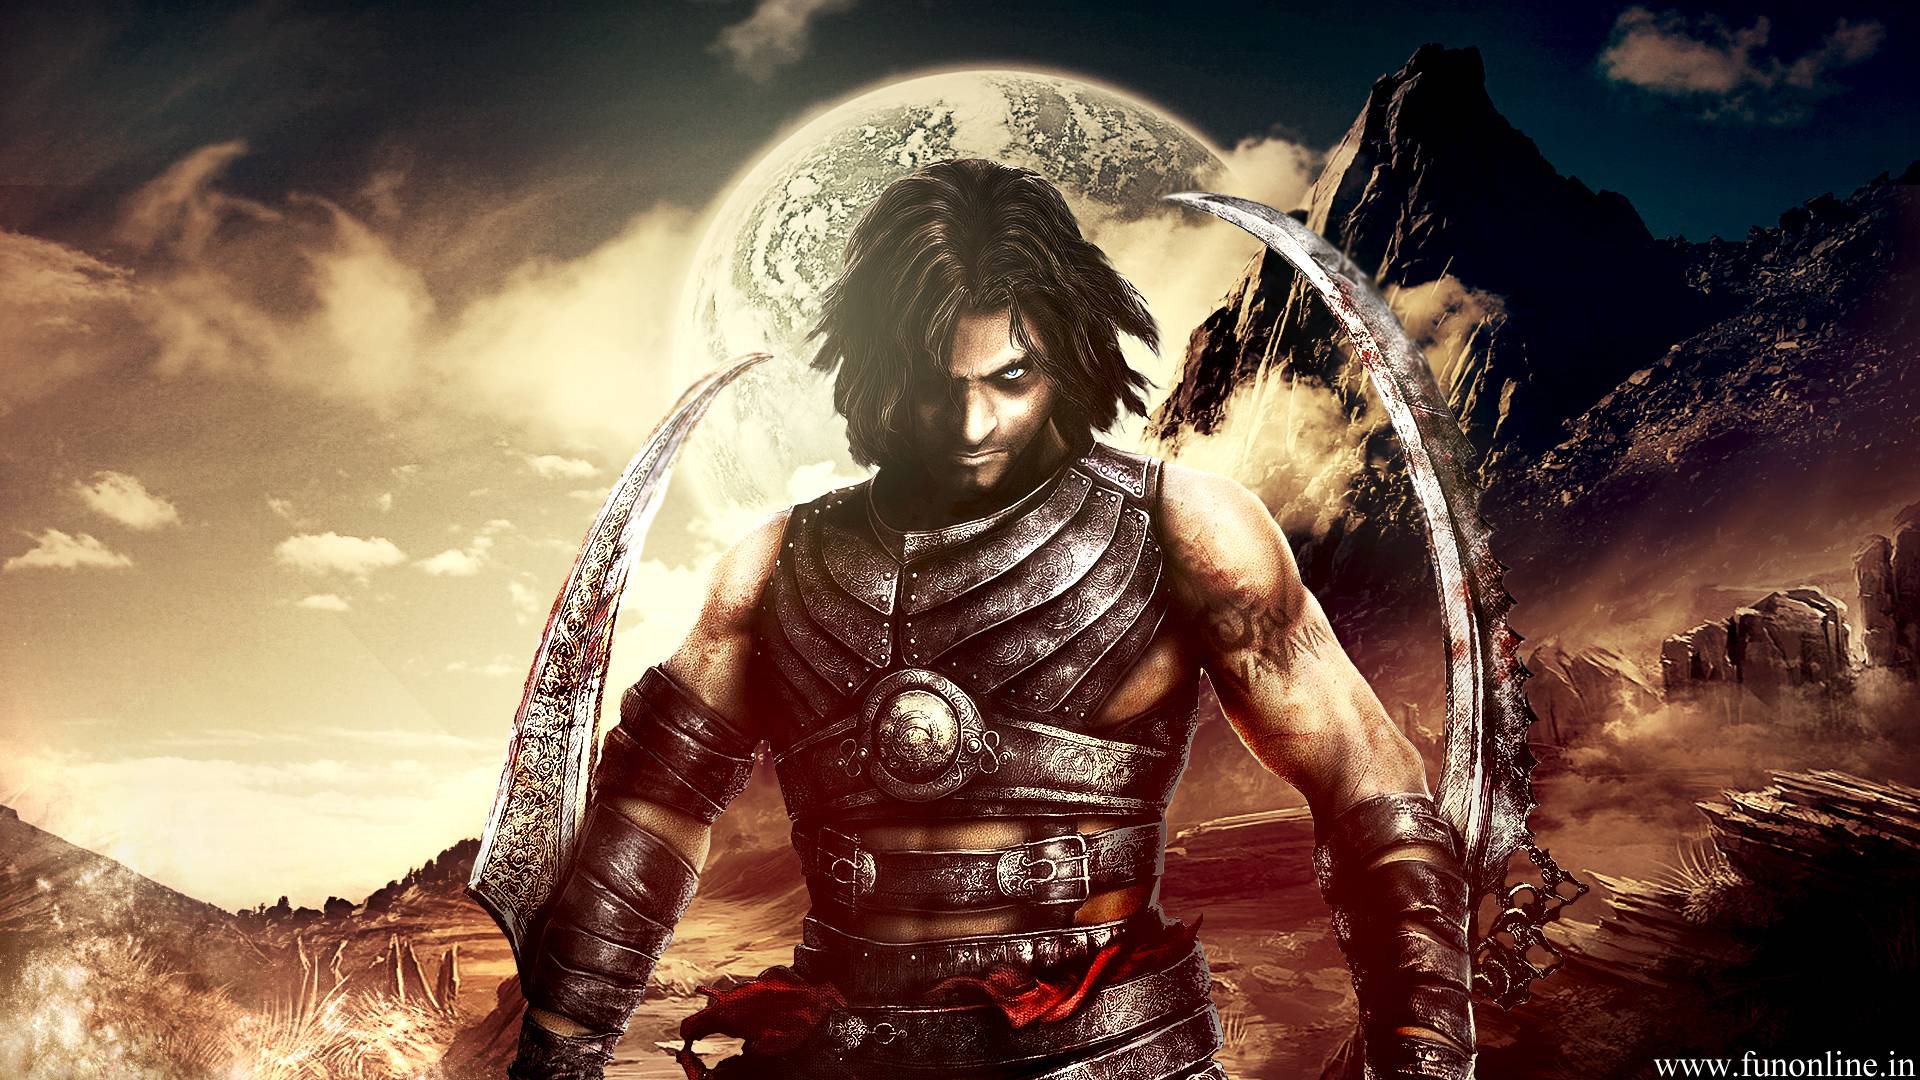 Free Download Prince Of Persia Warrior Within Wallpapers Images, Photos, Reviews